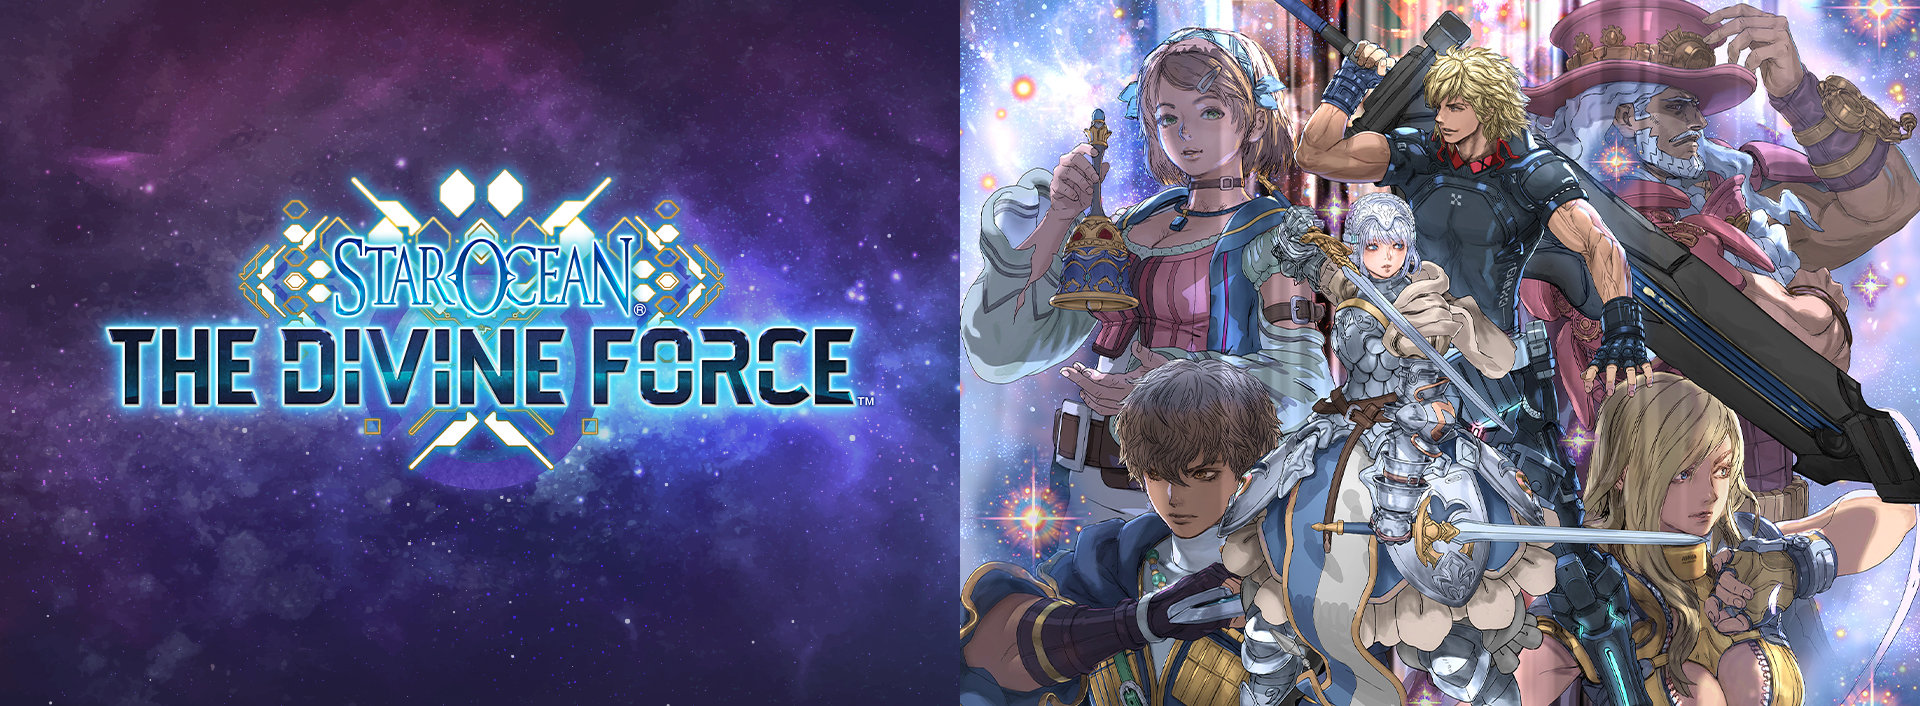 《STAR OCEAN THE DIVINE FORCE》最終預告片